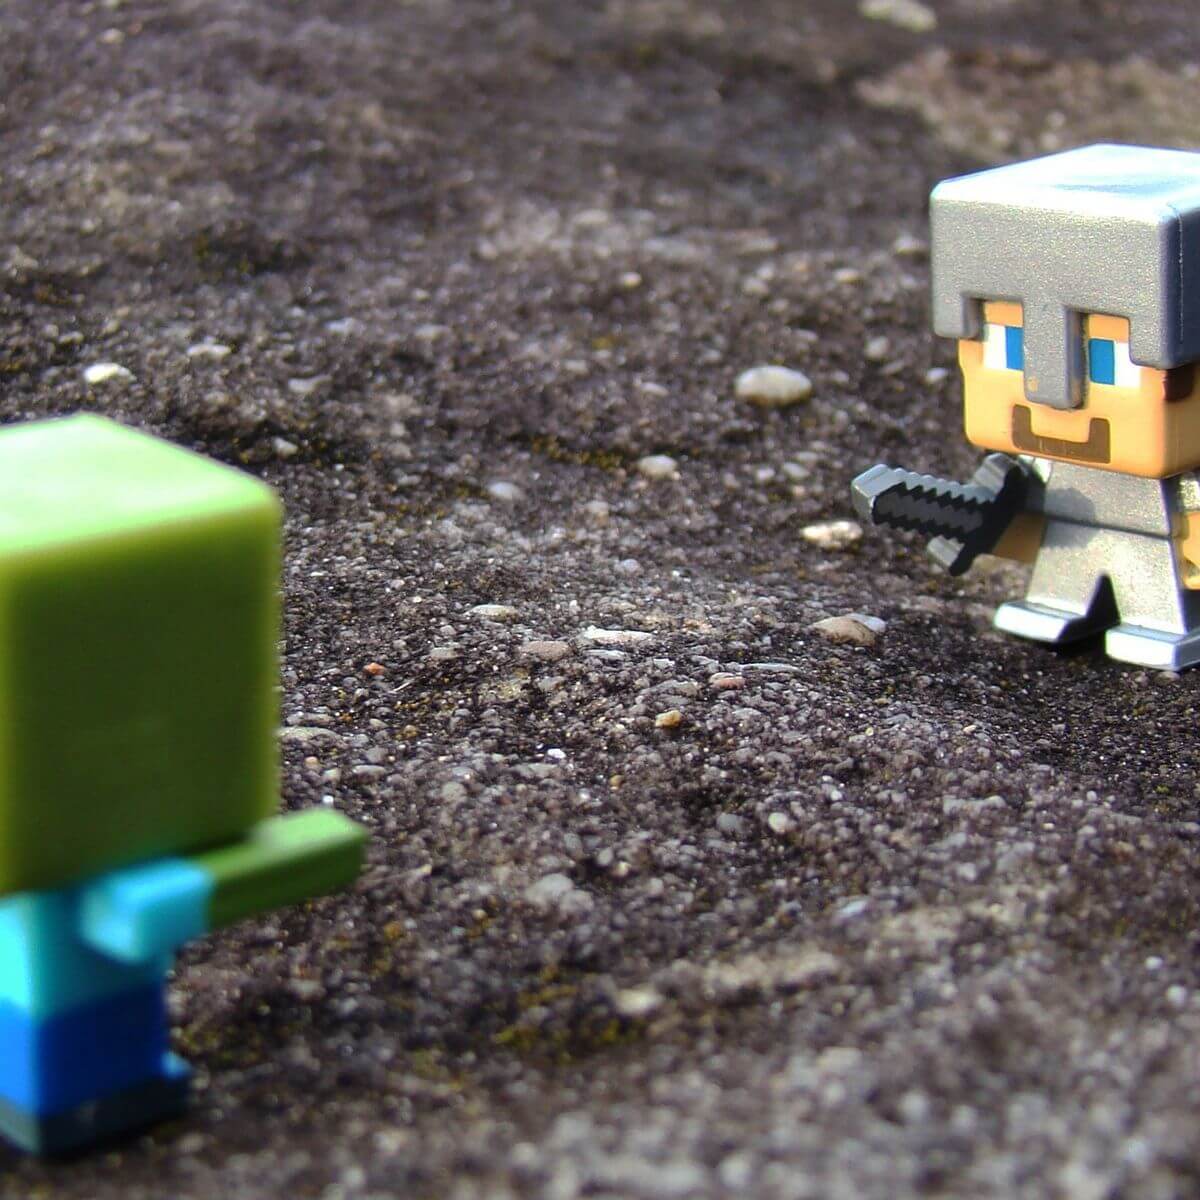 Minecraft toys -You don't have permission to build here Minecraft